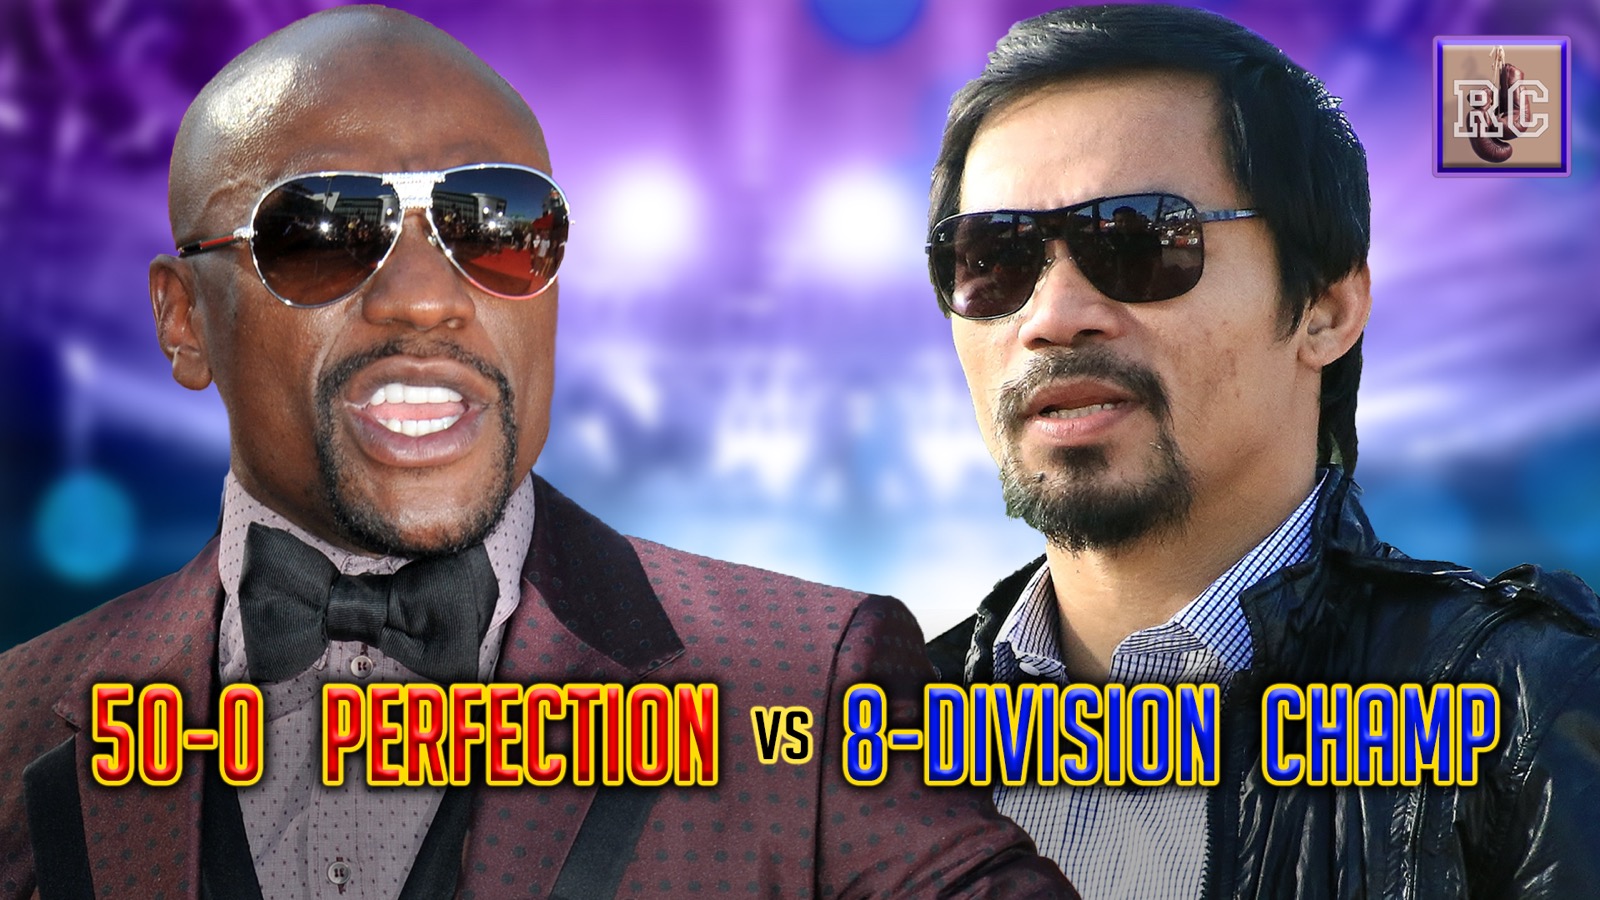 Image: VIDEO: Floyd Mayweather Jr’s 50-0 vs Manny Pacquiao's 8 divisions